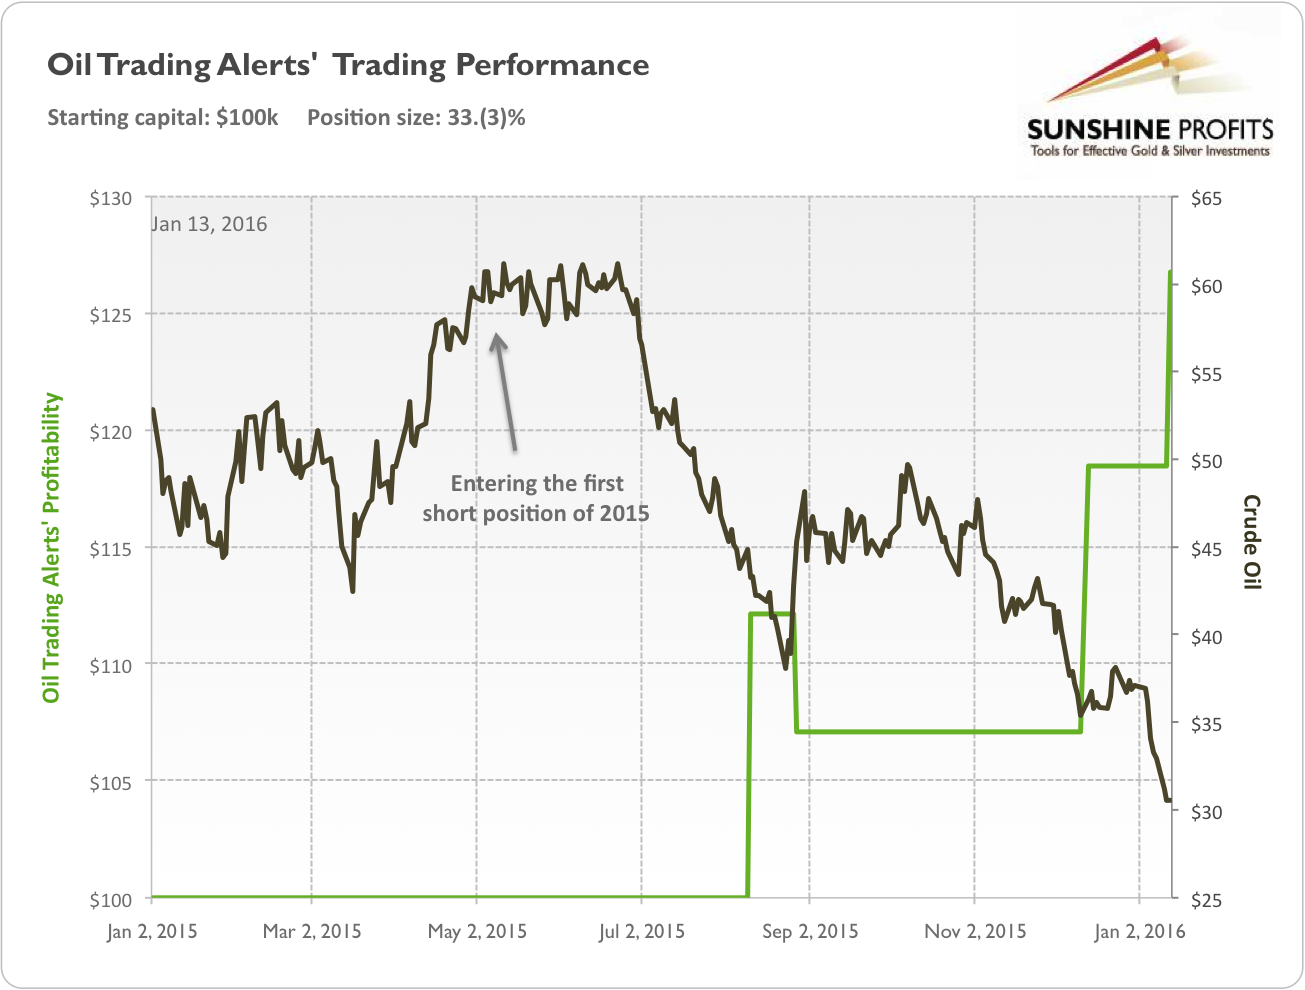 Oil Trading Alerts performance since the beginning of 2015